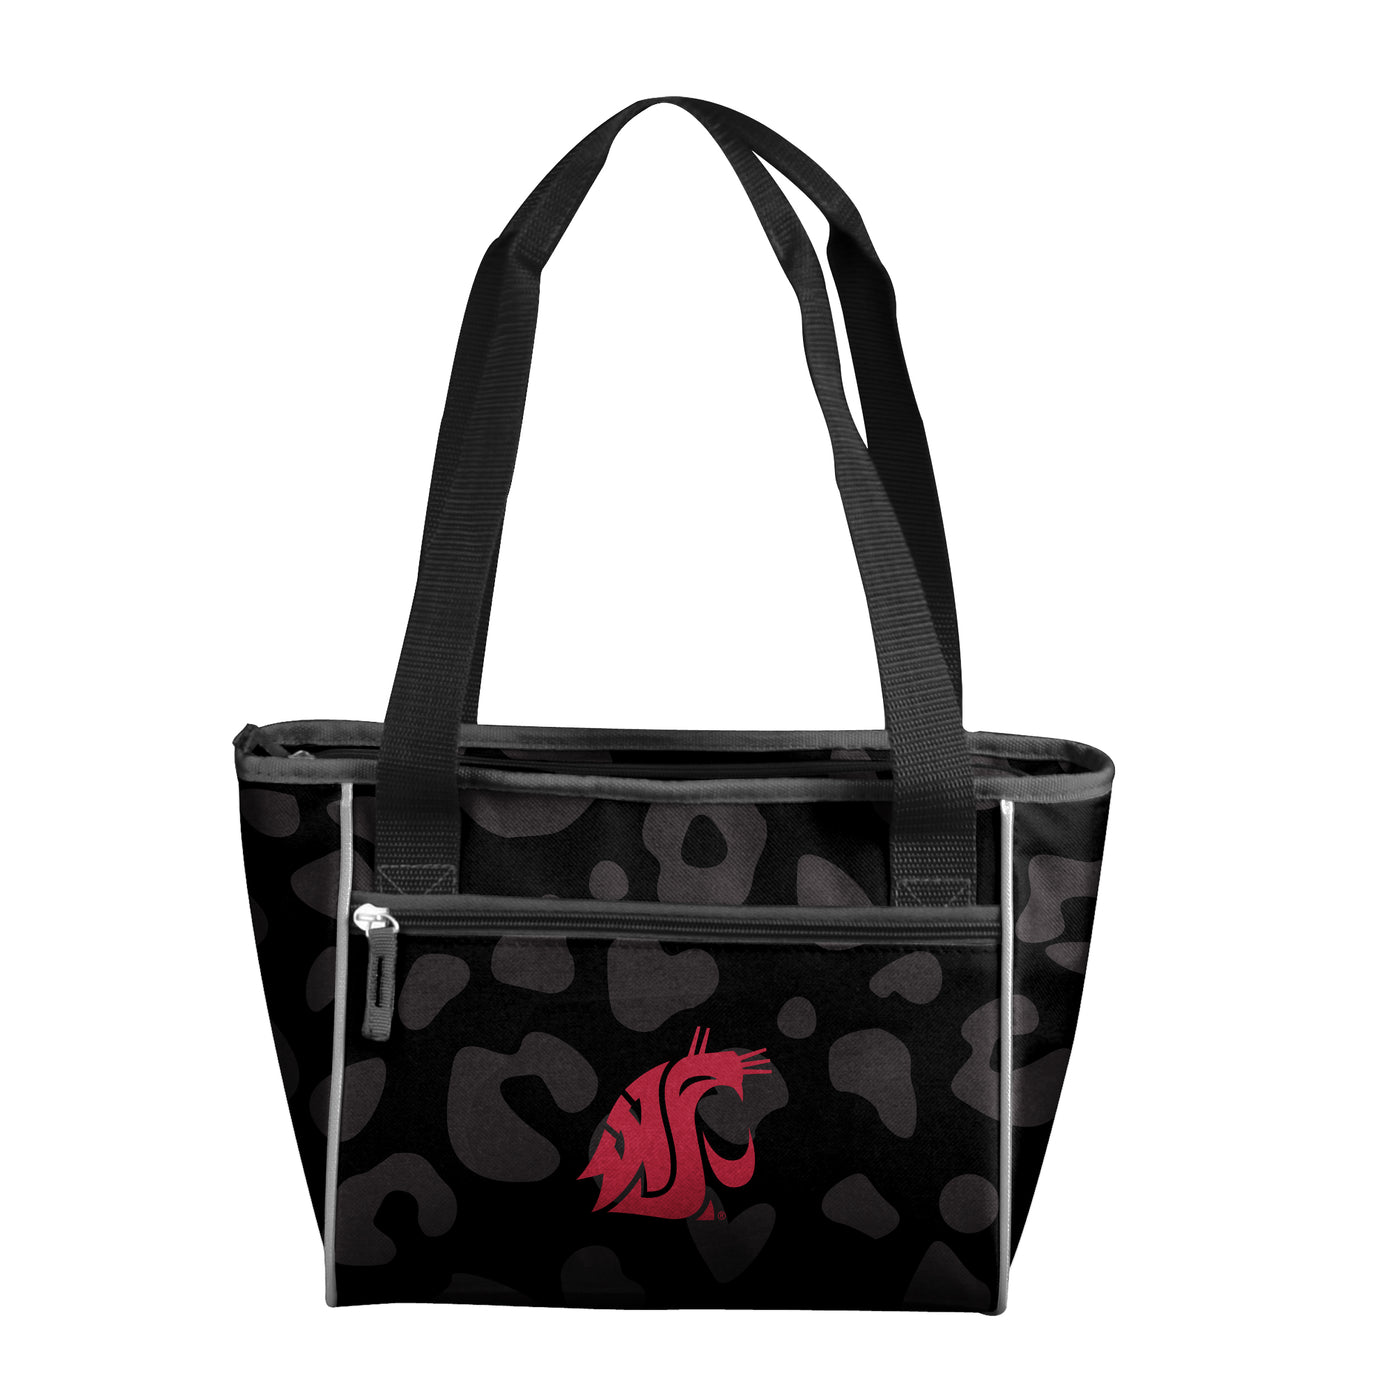 Washington State Leopard Print 16 Can Cooler Tote